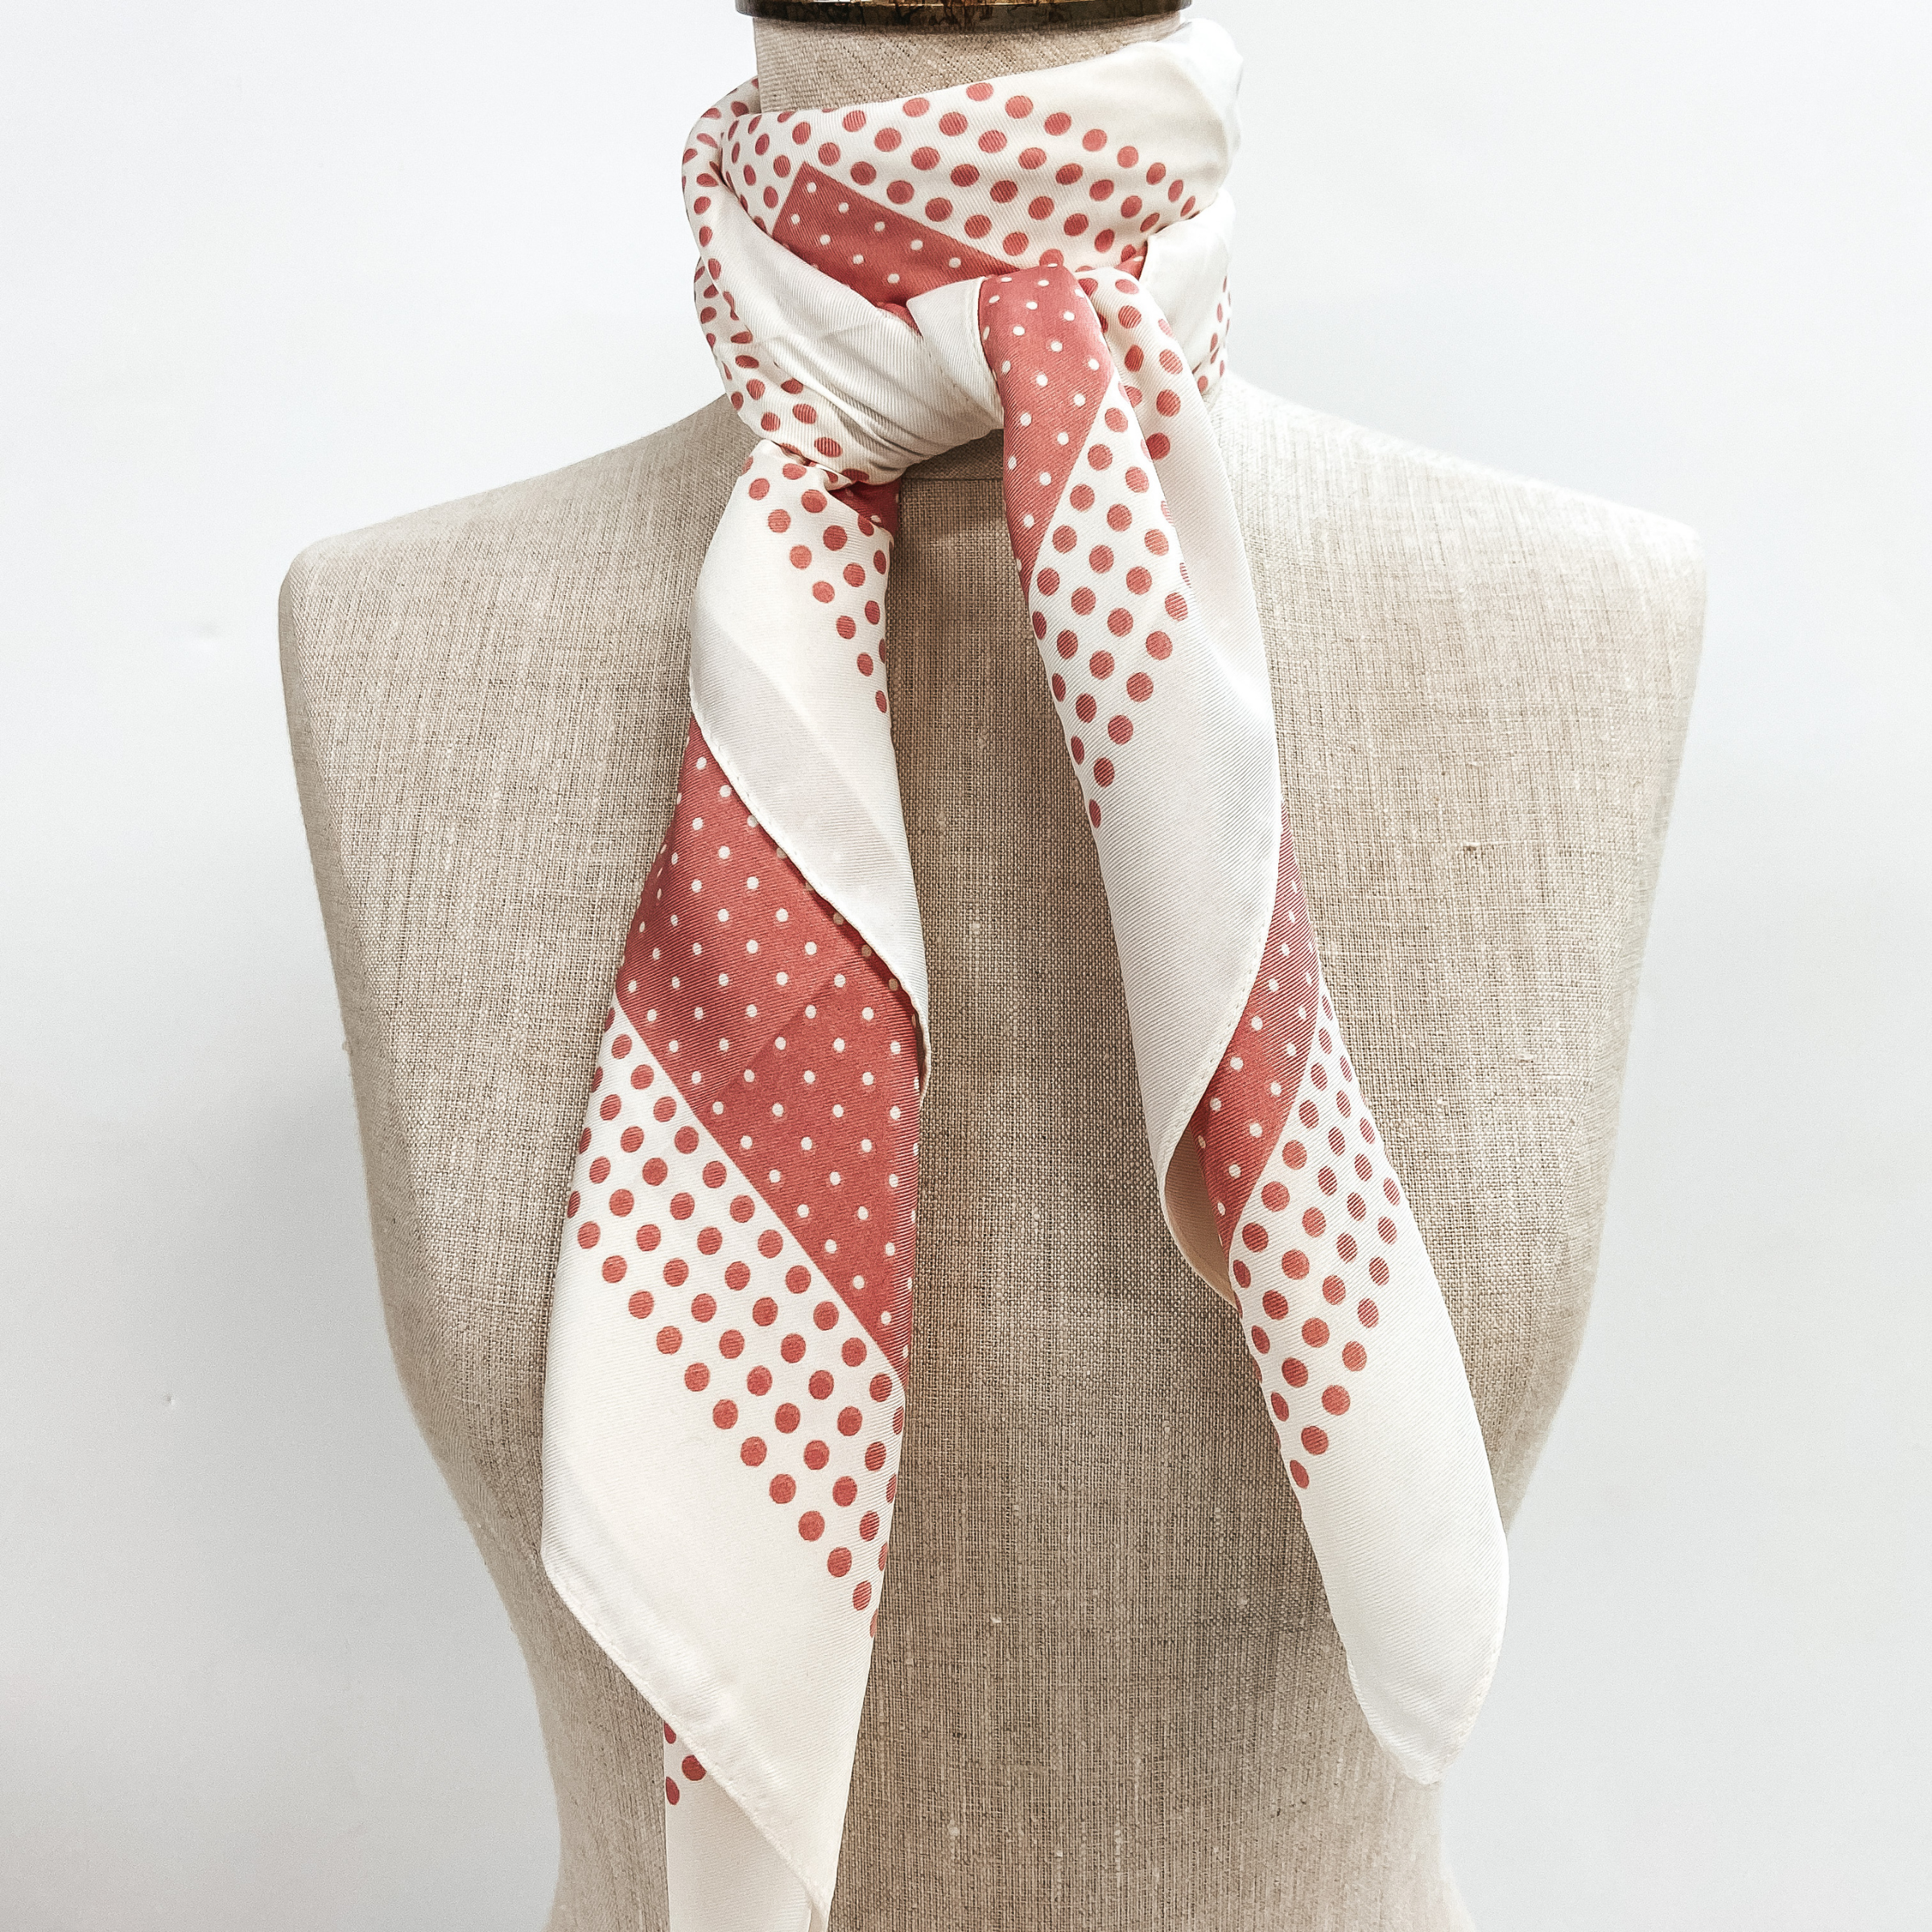 A pink and ivory polka dot scarf tied around the neck of a mannequin. Pictured on white background.